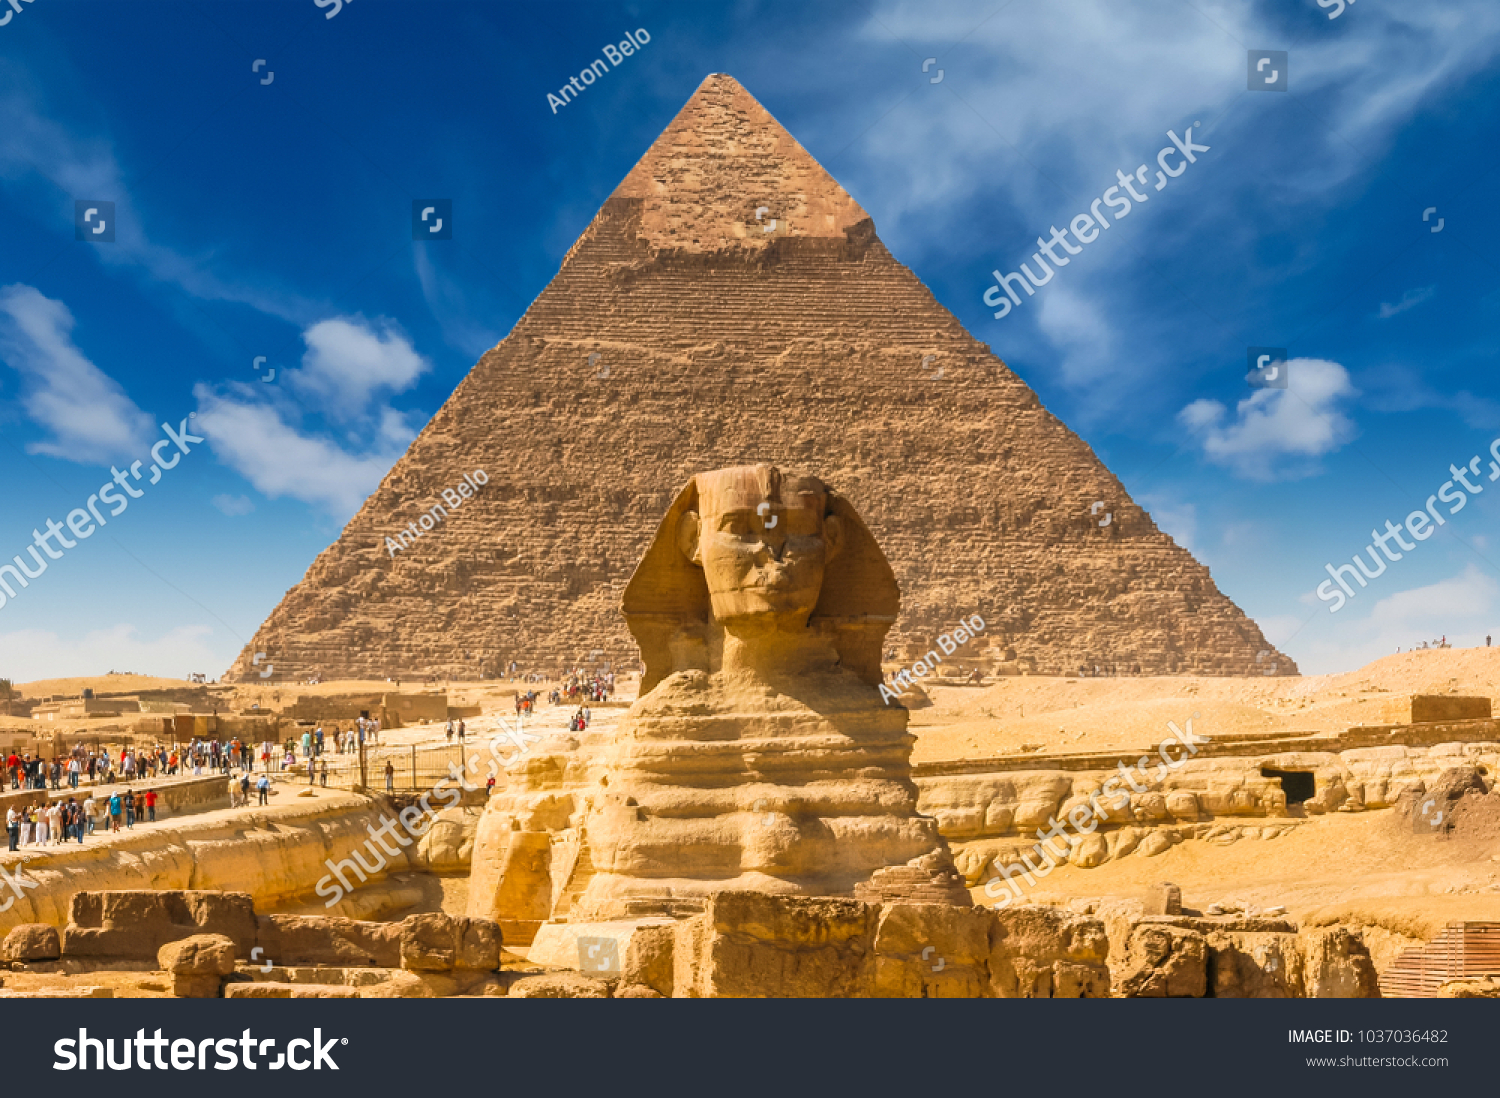 Egyptian sphinx. Cairo. Giza. Egypt. Travel background. Architectural monument. The tombs of the pharaohs. Vacation holidays background wallpaper #1037036482